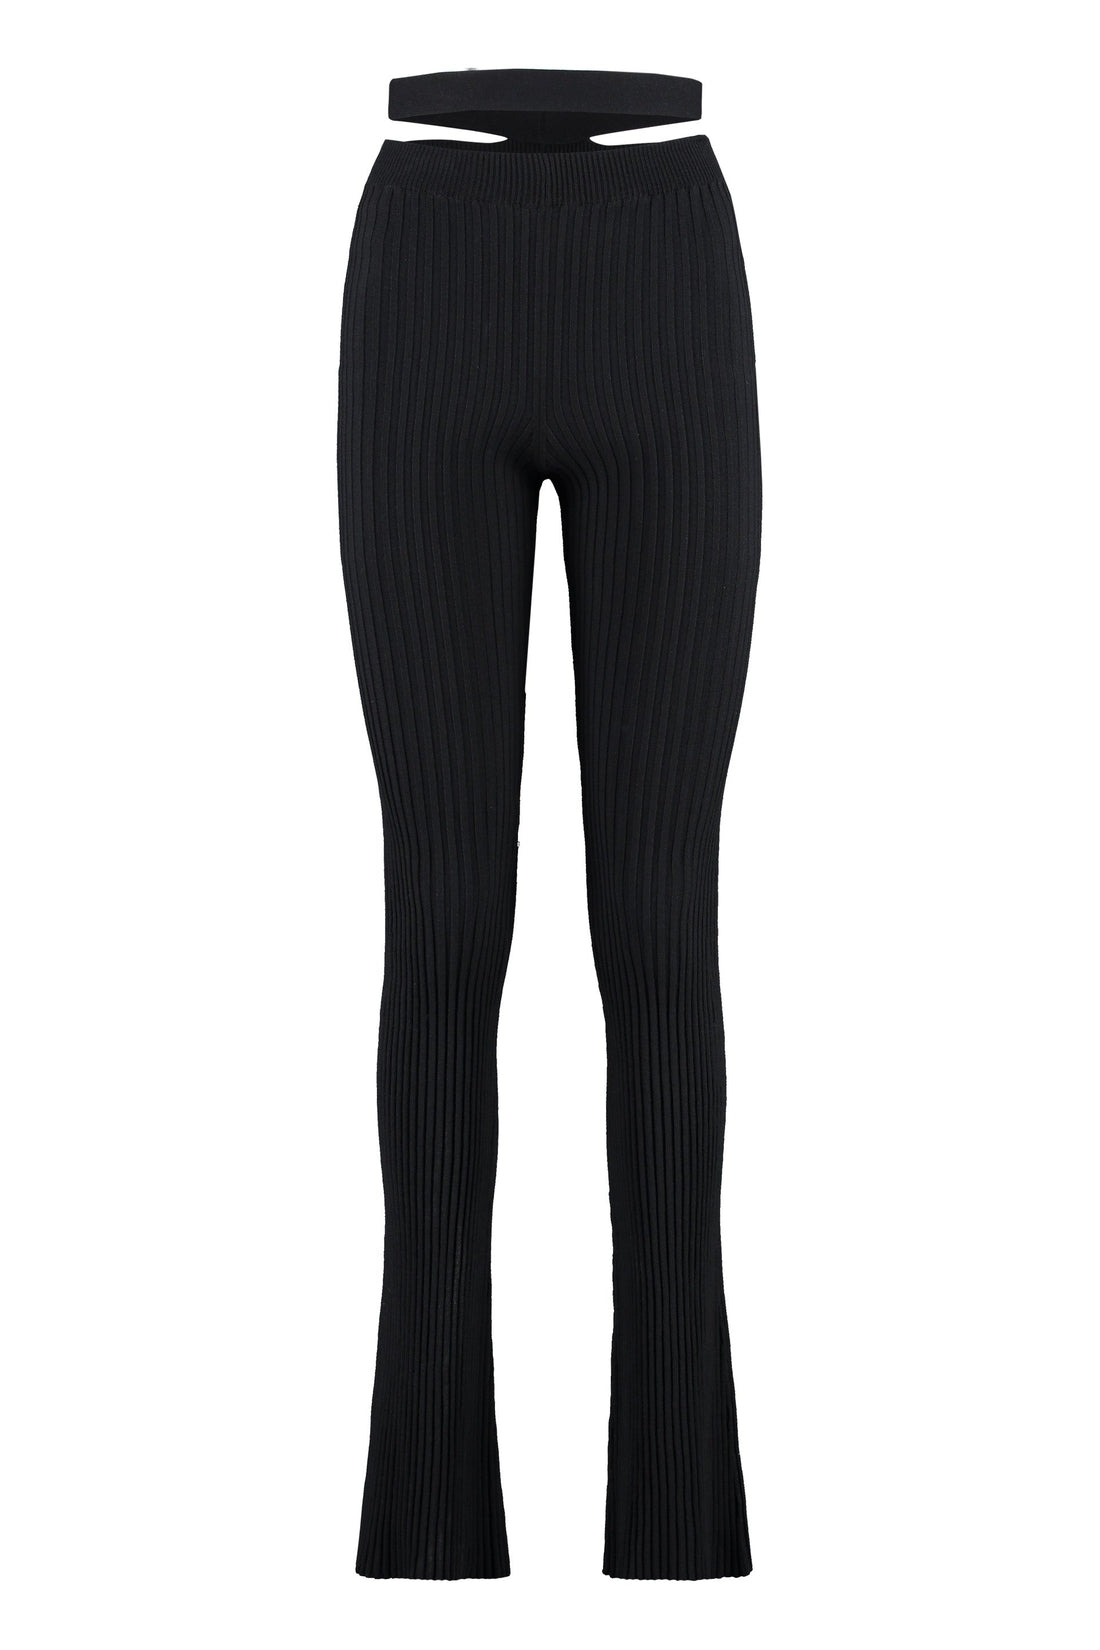 ANDREADAMO-OUTLET-SALE-Ribs knitted trousers-ARCHIVIST